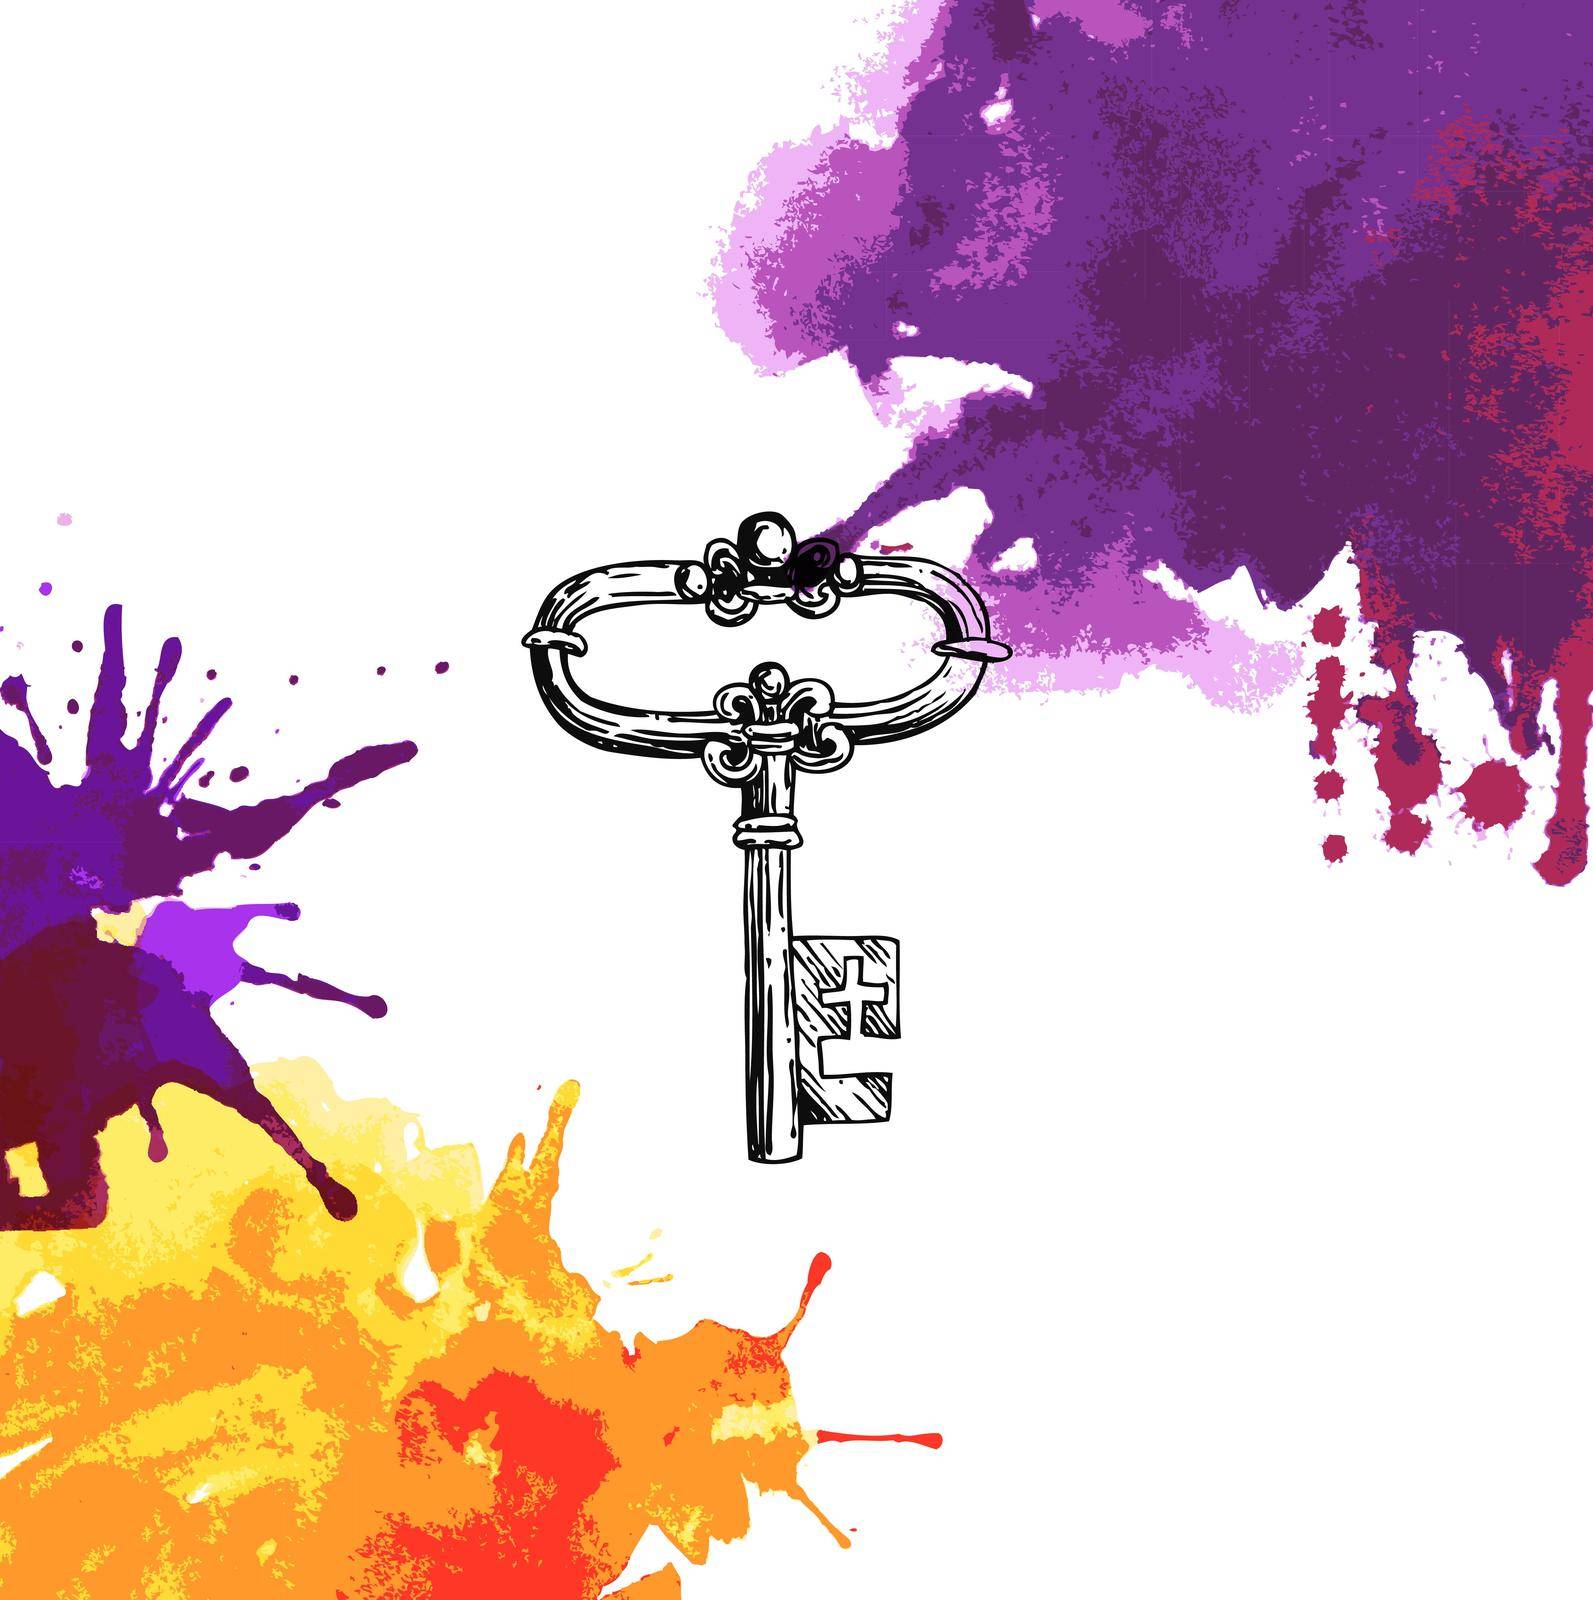 Watercolor stains violet and yellow. Vintage key. Vector